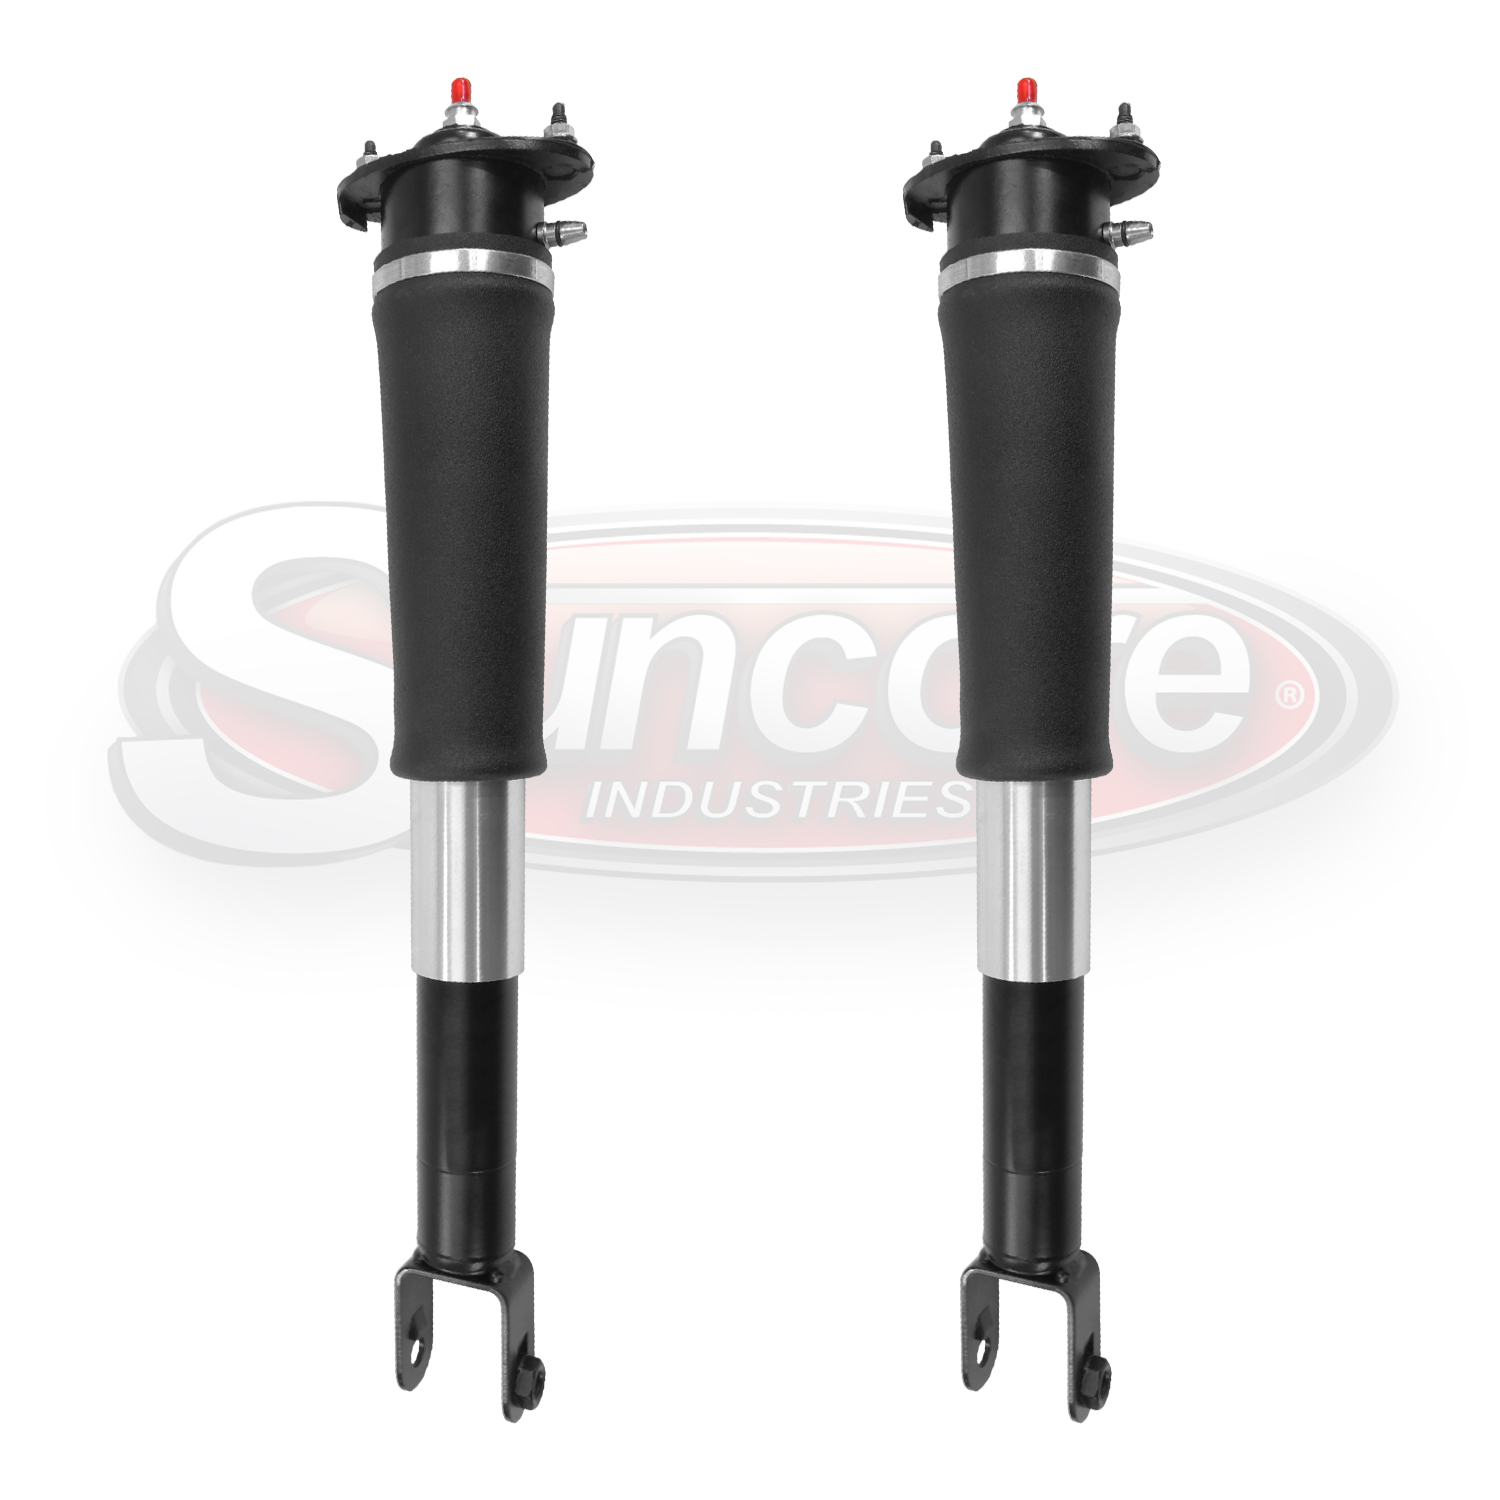 Electronic Active Suspension OE Air Shock Absorbers Rear Pair for 2004-2009 Cadillac SRX